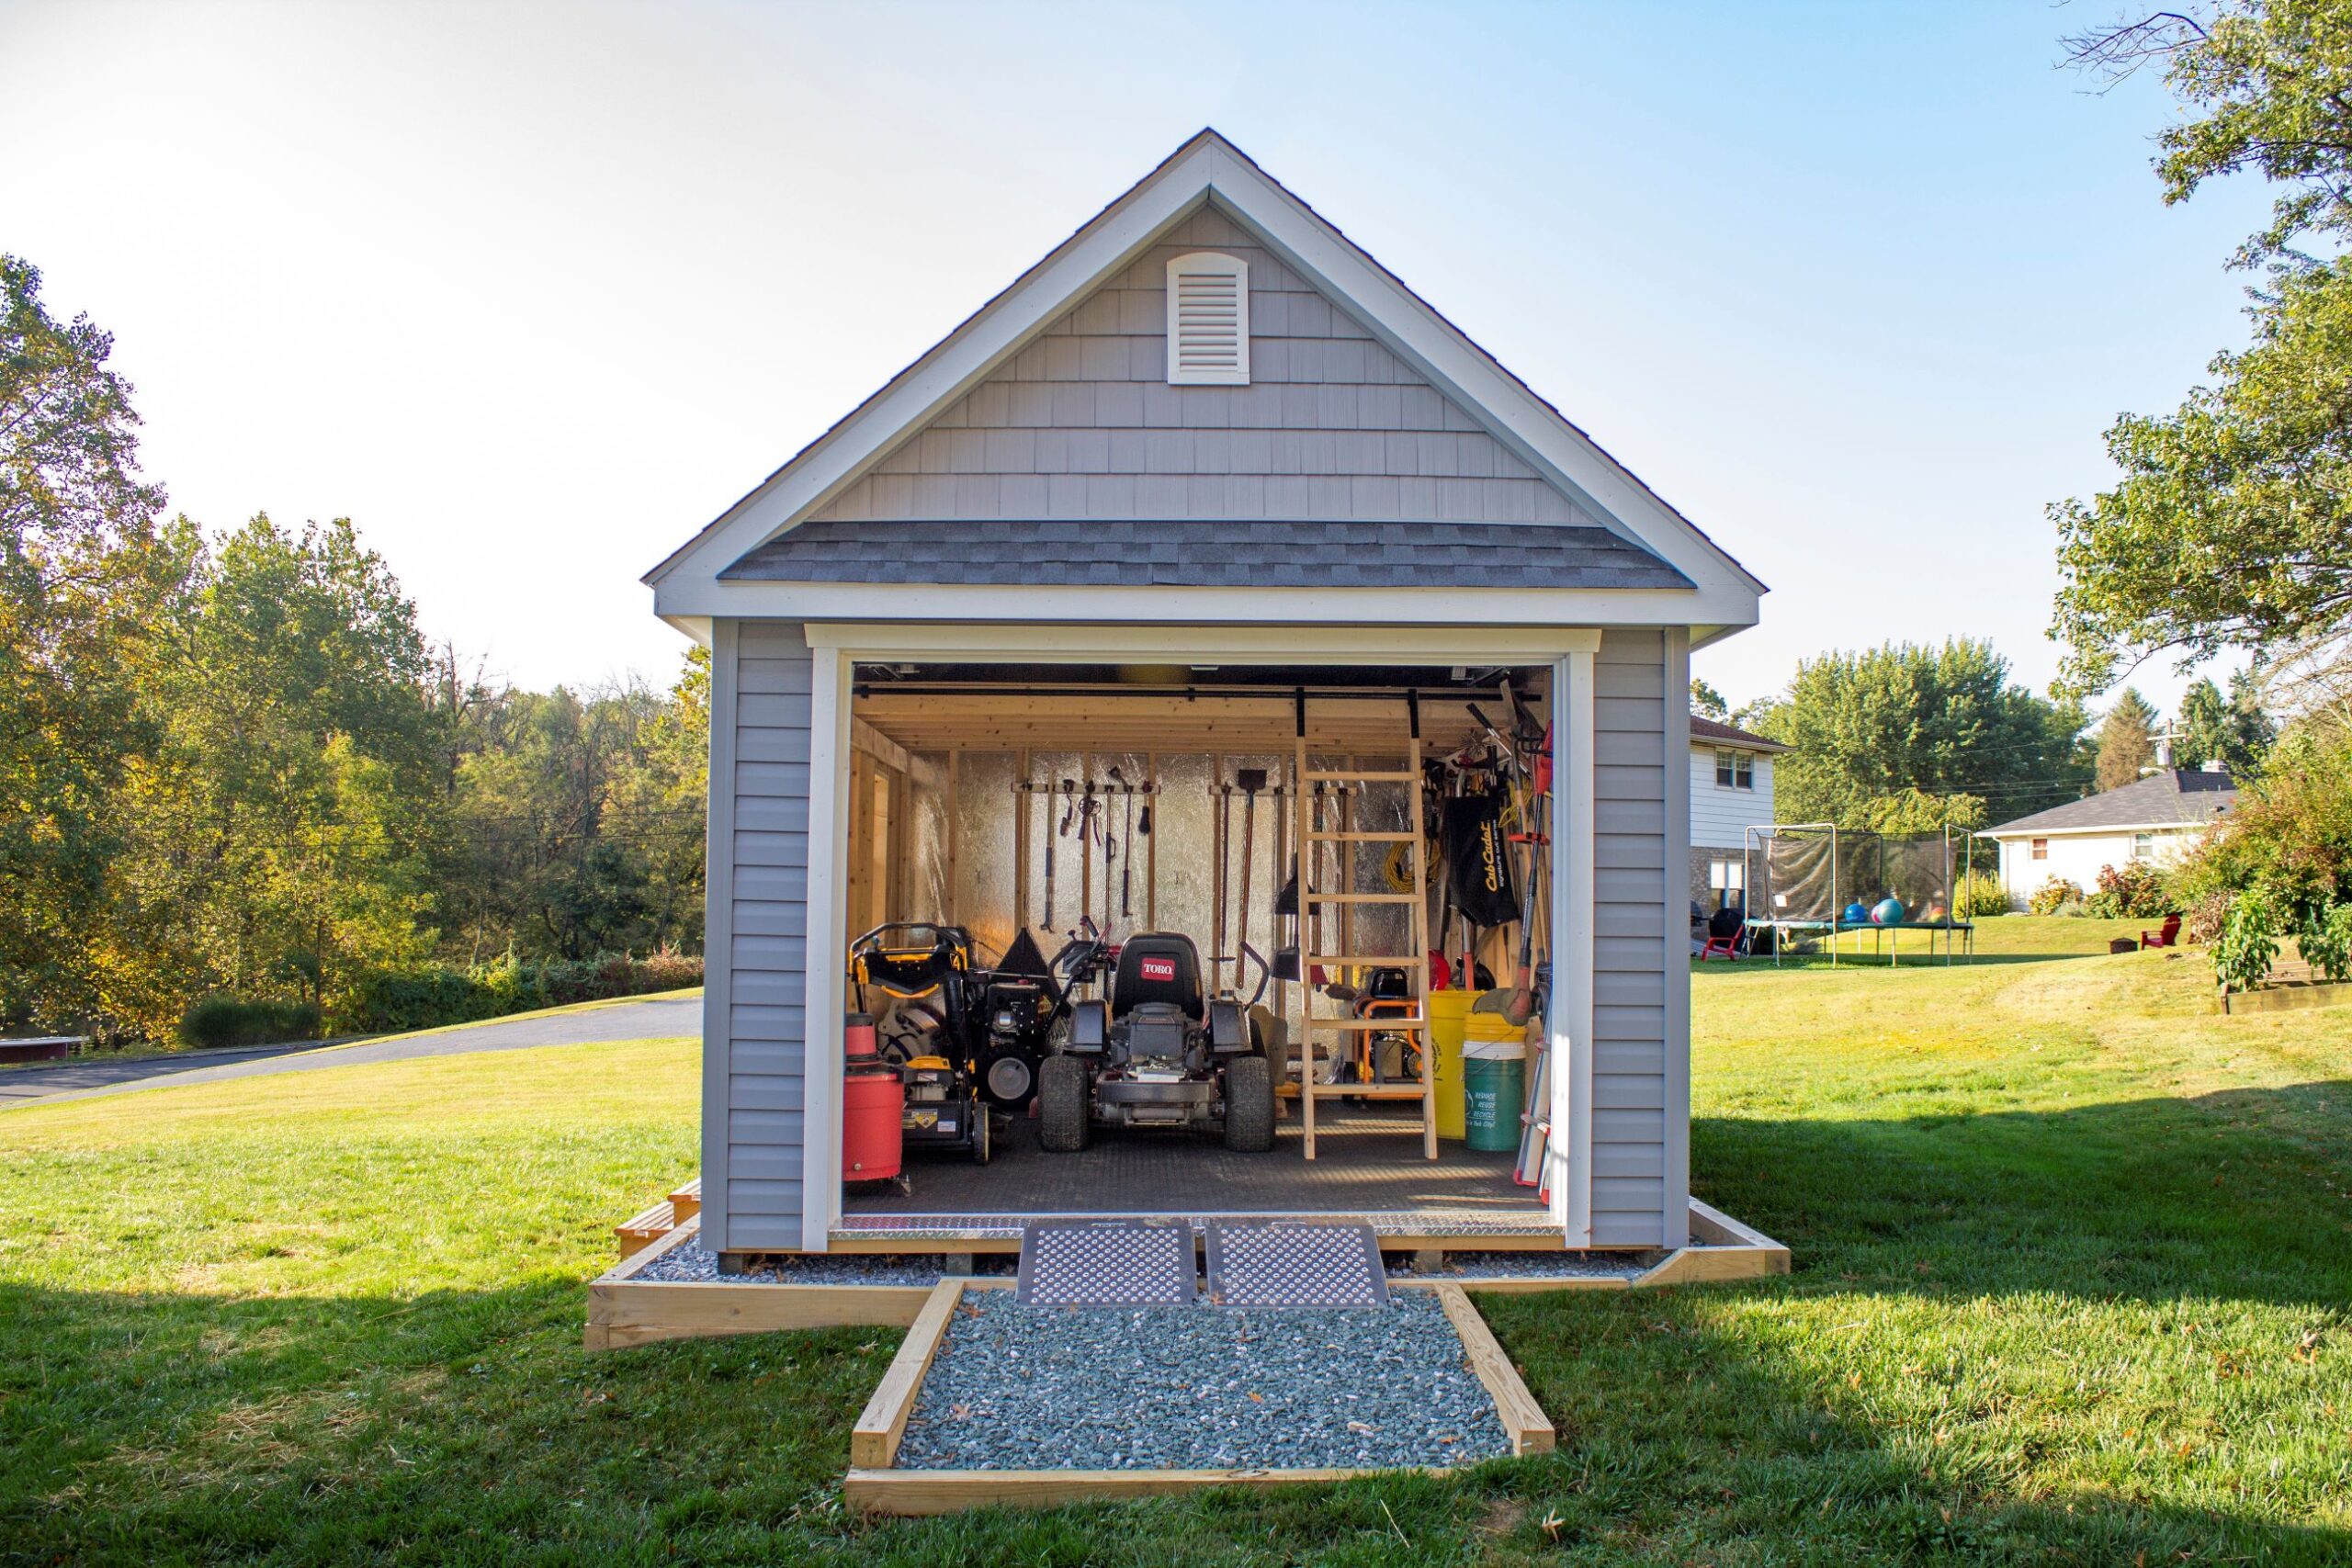 Front view of a New England Barn Shed with an open door that shows inside the interior.